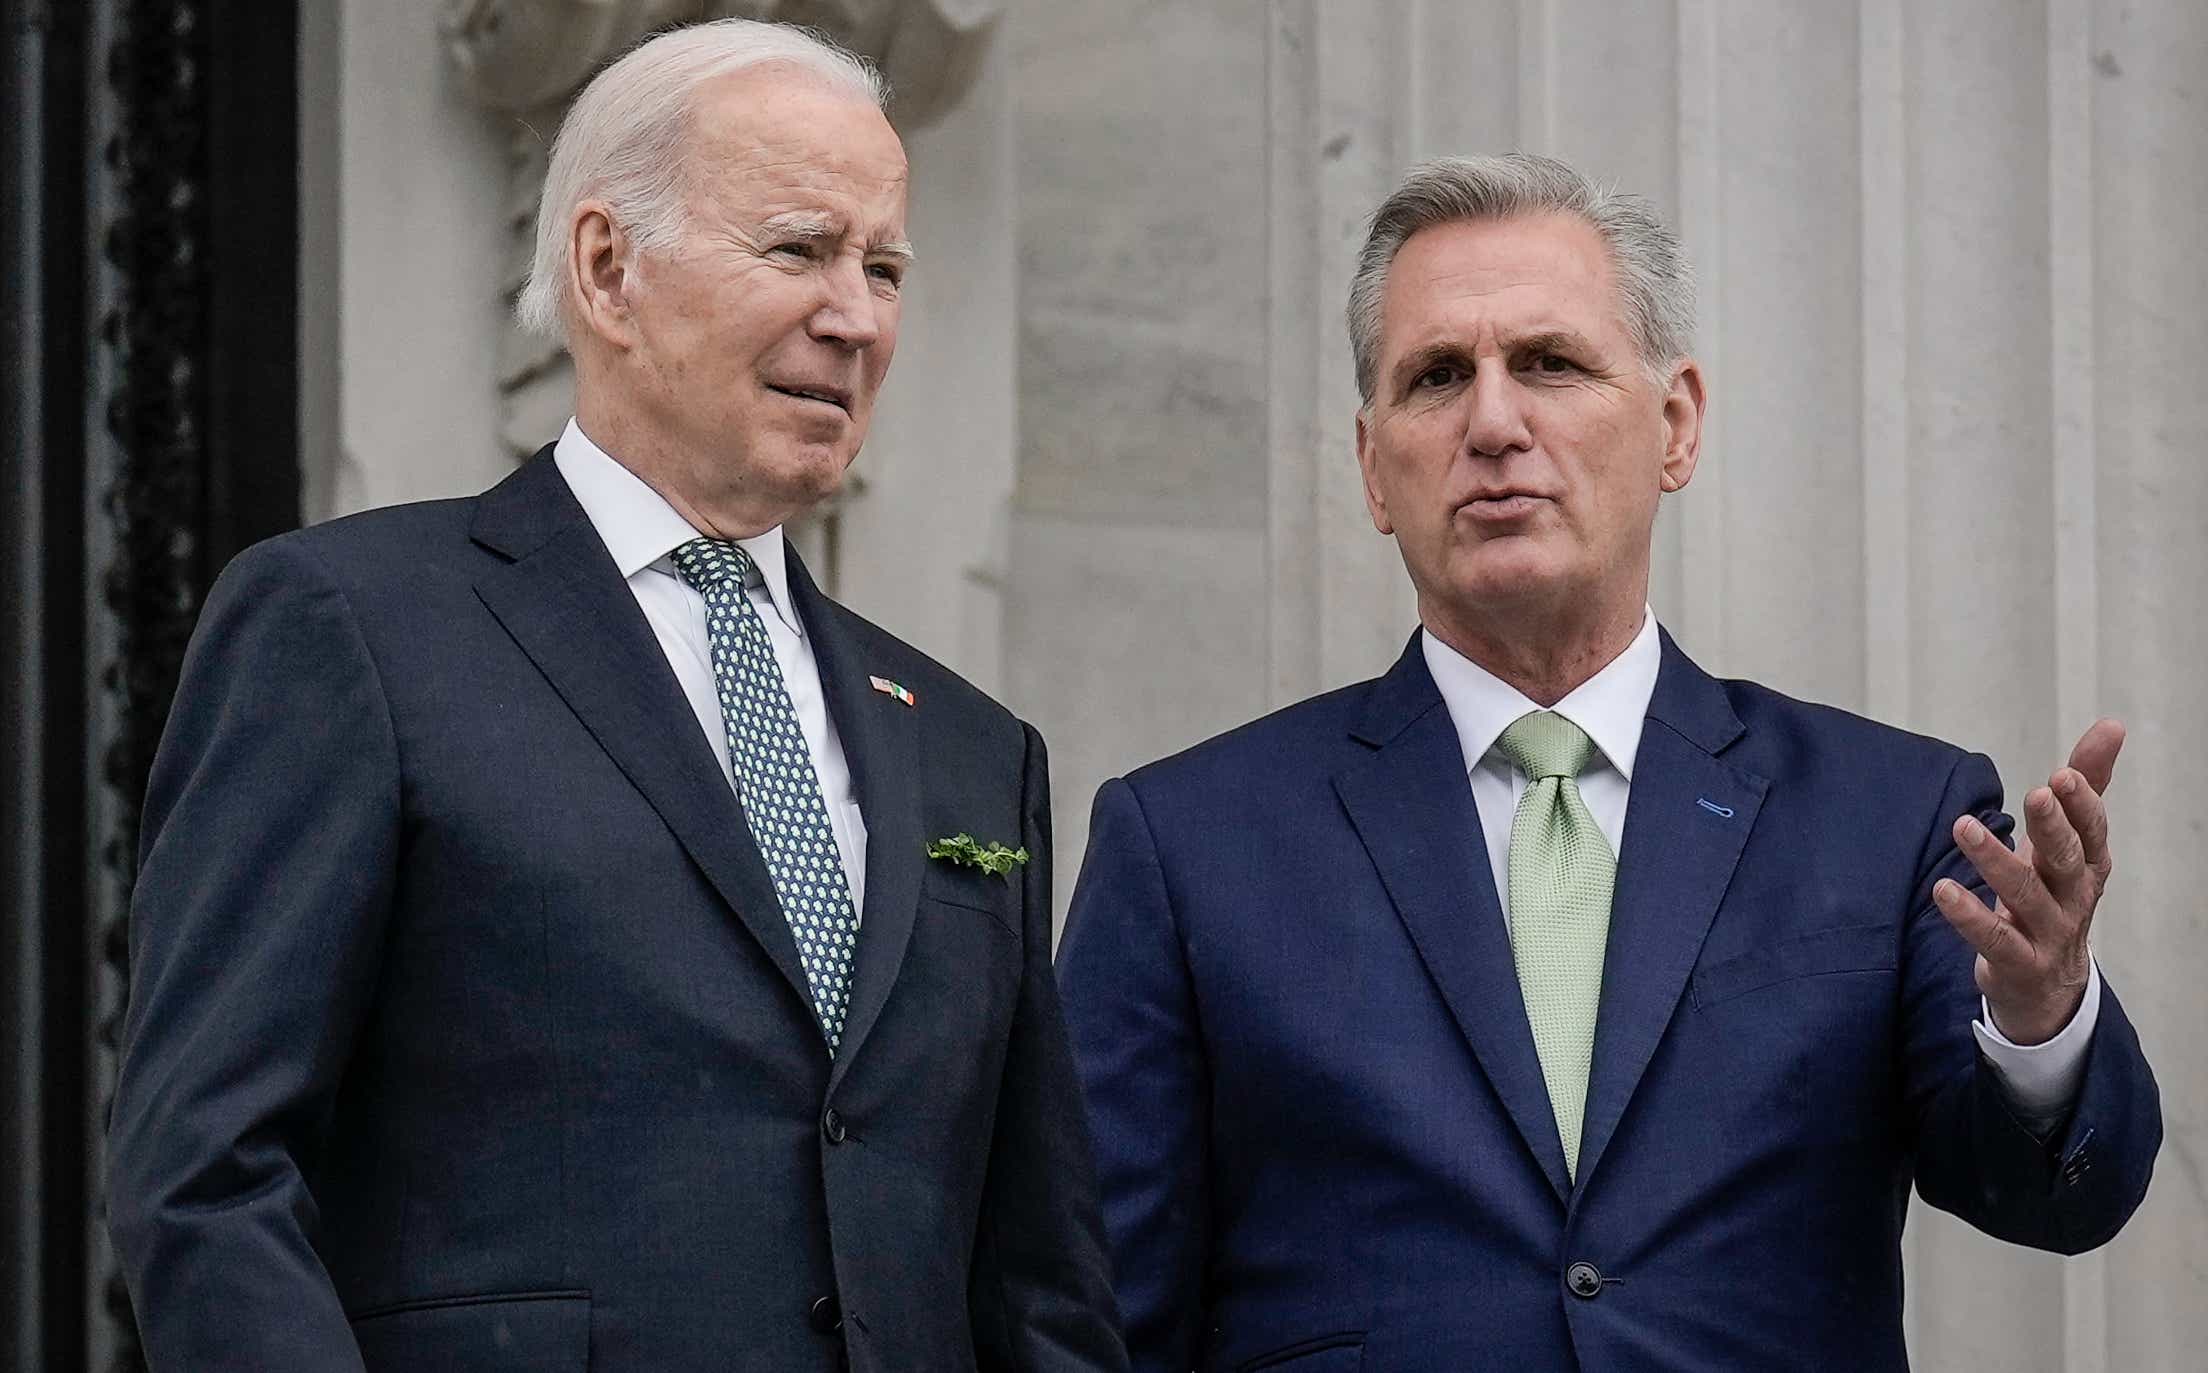 U.S. President Joe Biden and Speaker of the House Kevin McCarthy (R-CA) talk as they depart the U.S. Capitol